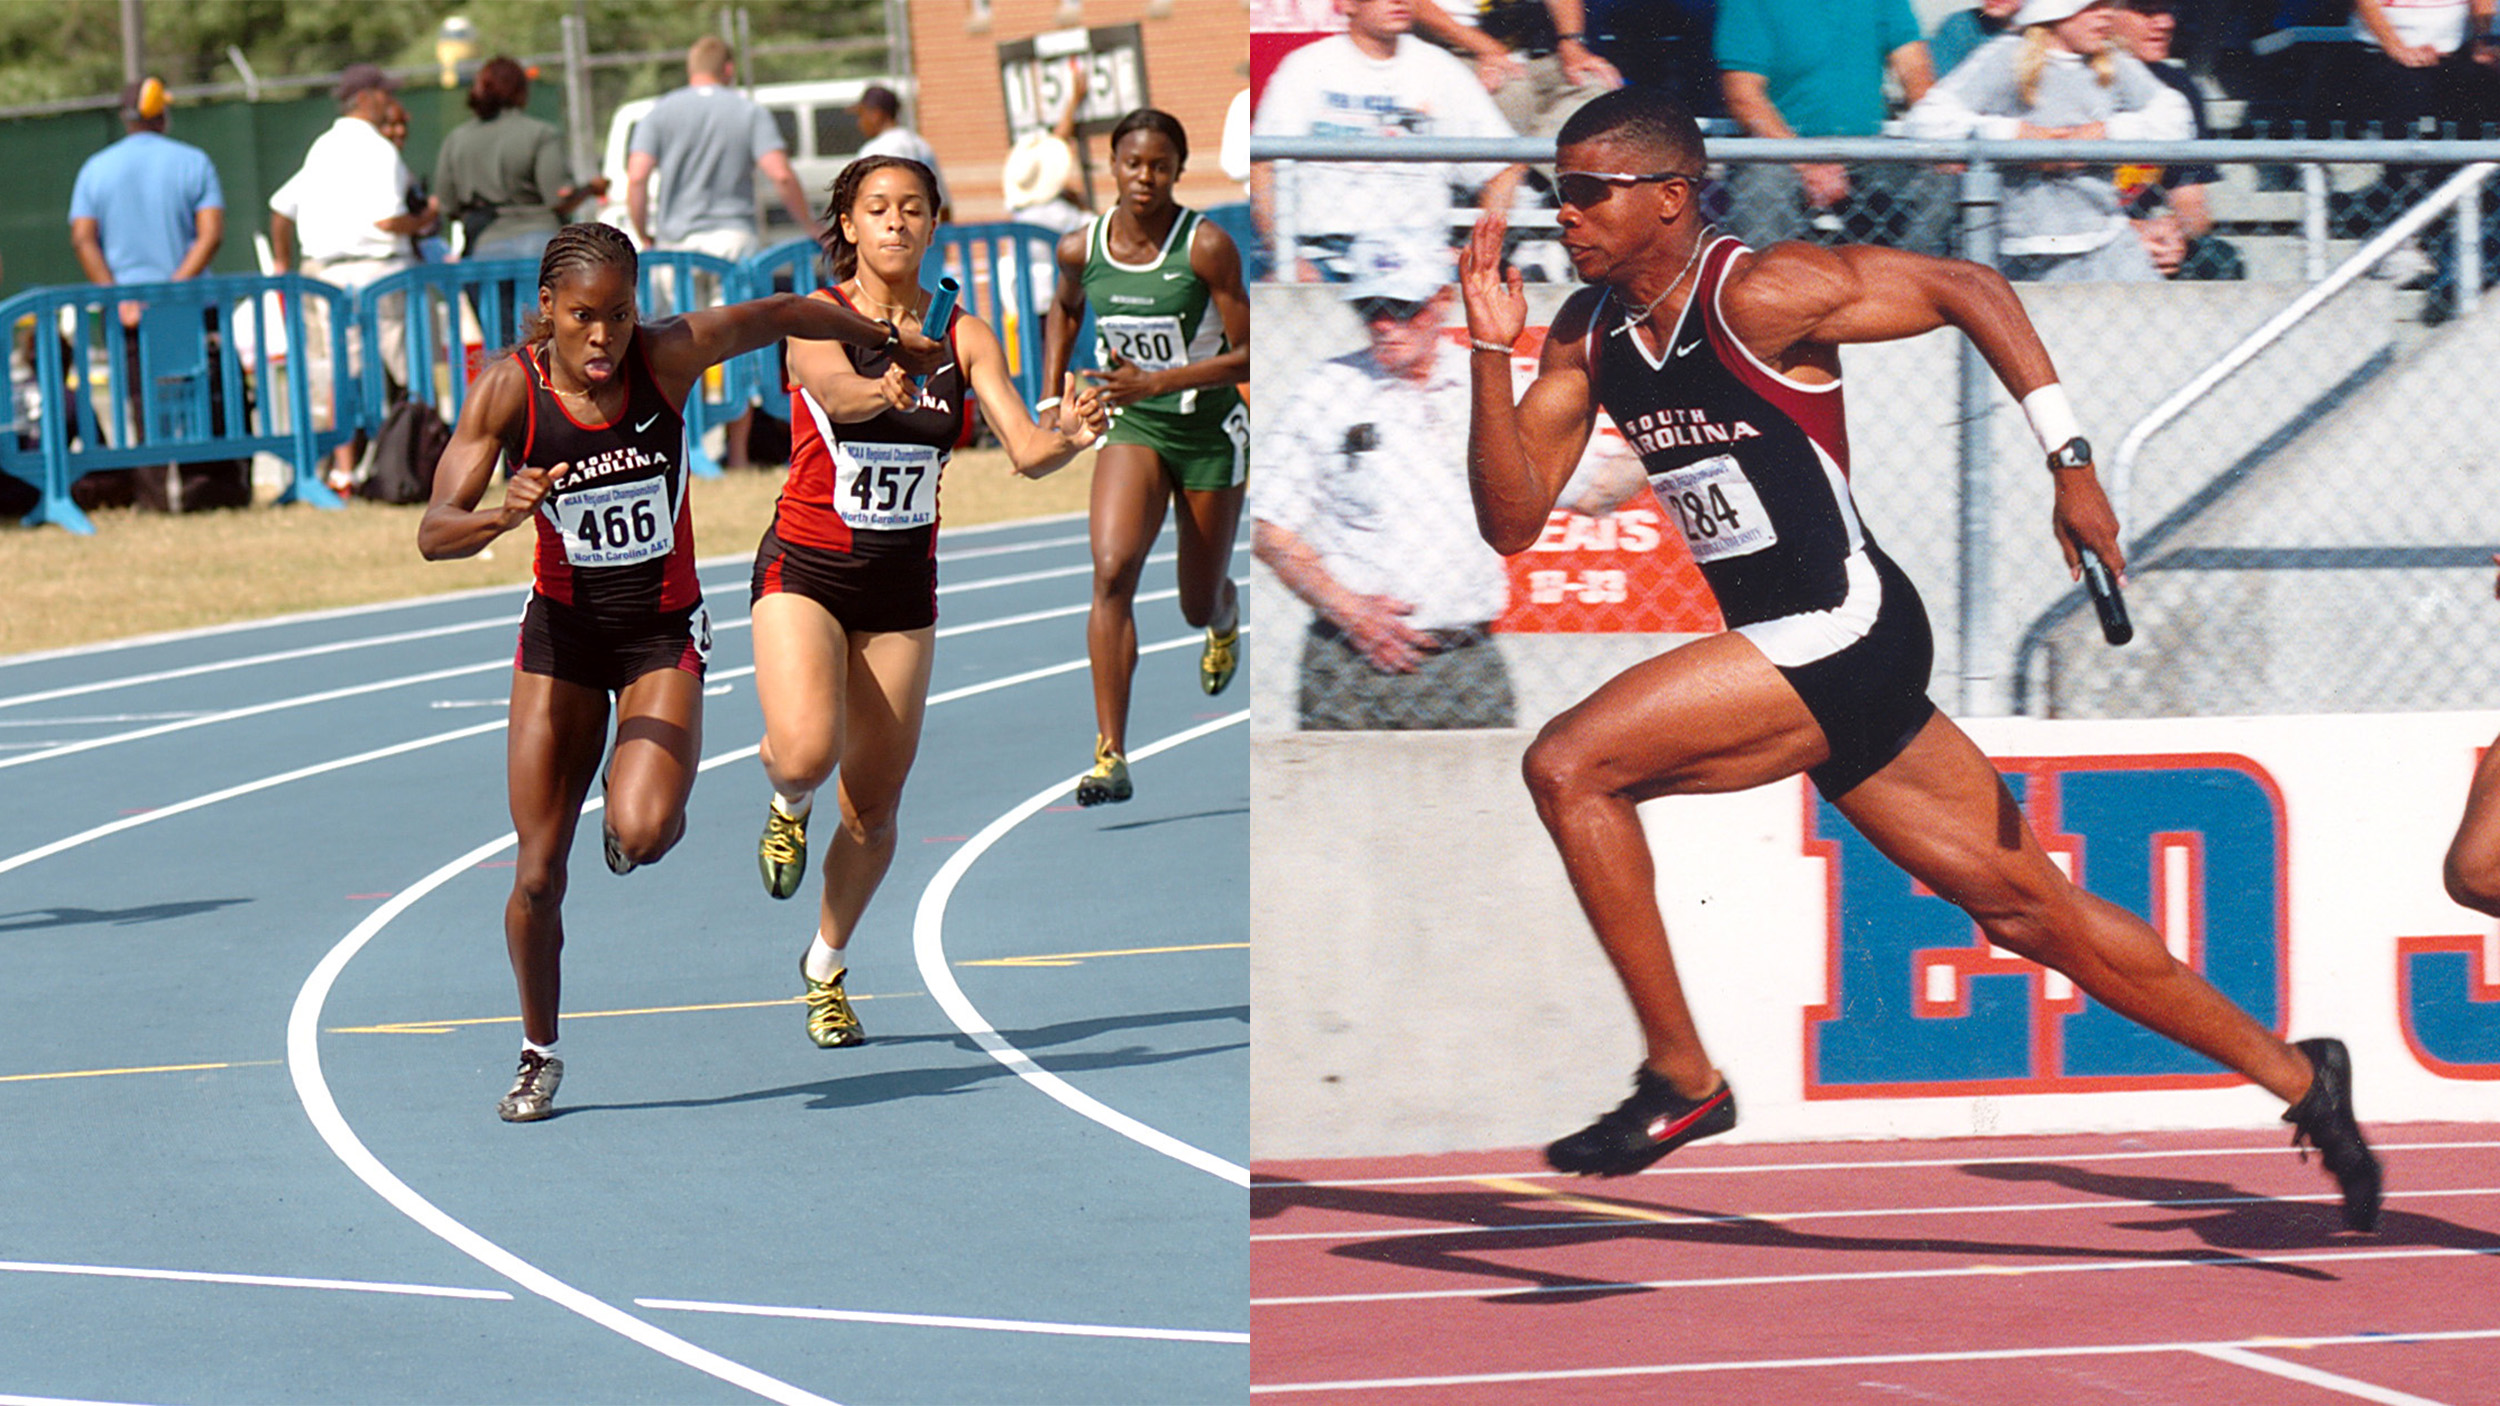 Pair of Gamecocks Inducted into Penn Relays Wall of Fame